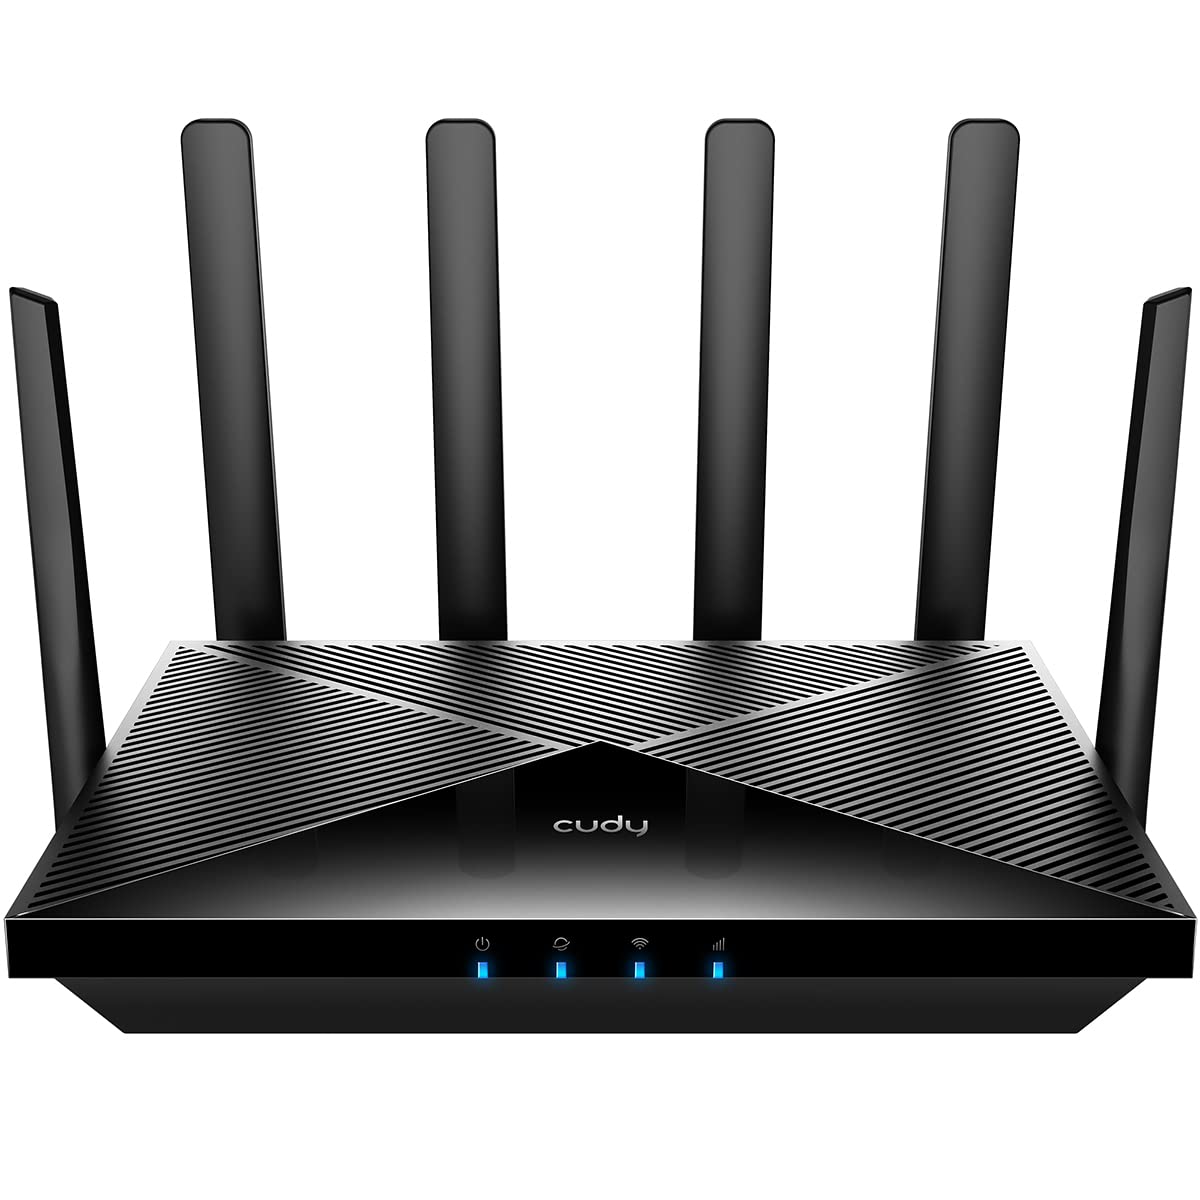 Cudy 4G LTE Cat 18 WiFi 6 Router, Up to 1.2Gbps 4G LTE Modem, Qualcomm Chipset EG18, 4 x 4 MIMO, AX1800 WiFi 6, OpenVPN, Wireguard, Zerotier, Cloudflare, IPv6, Detachable Antennas, Dual SIM, LT18